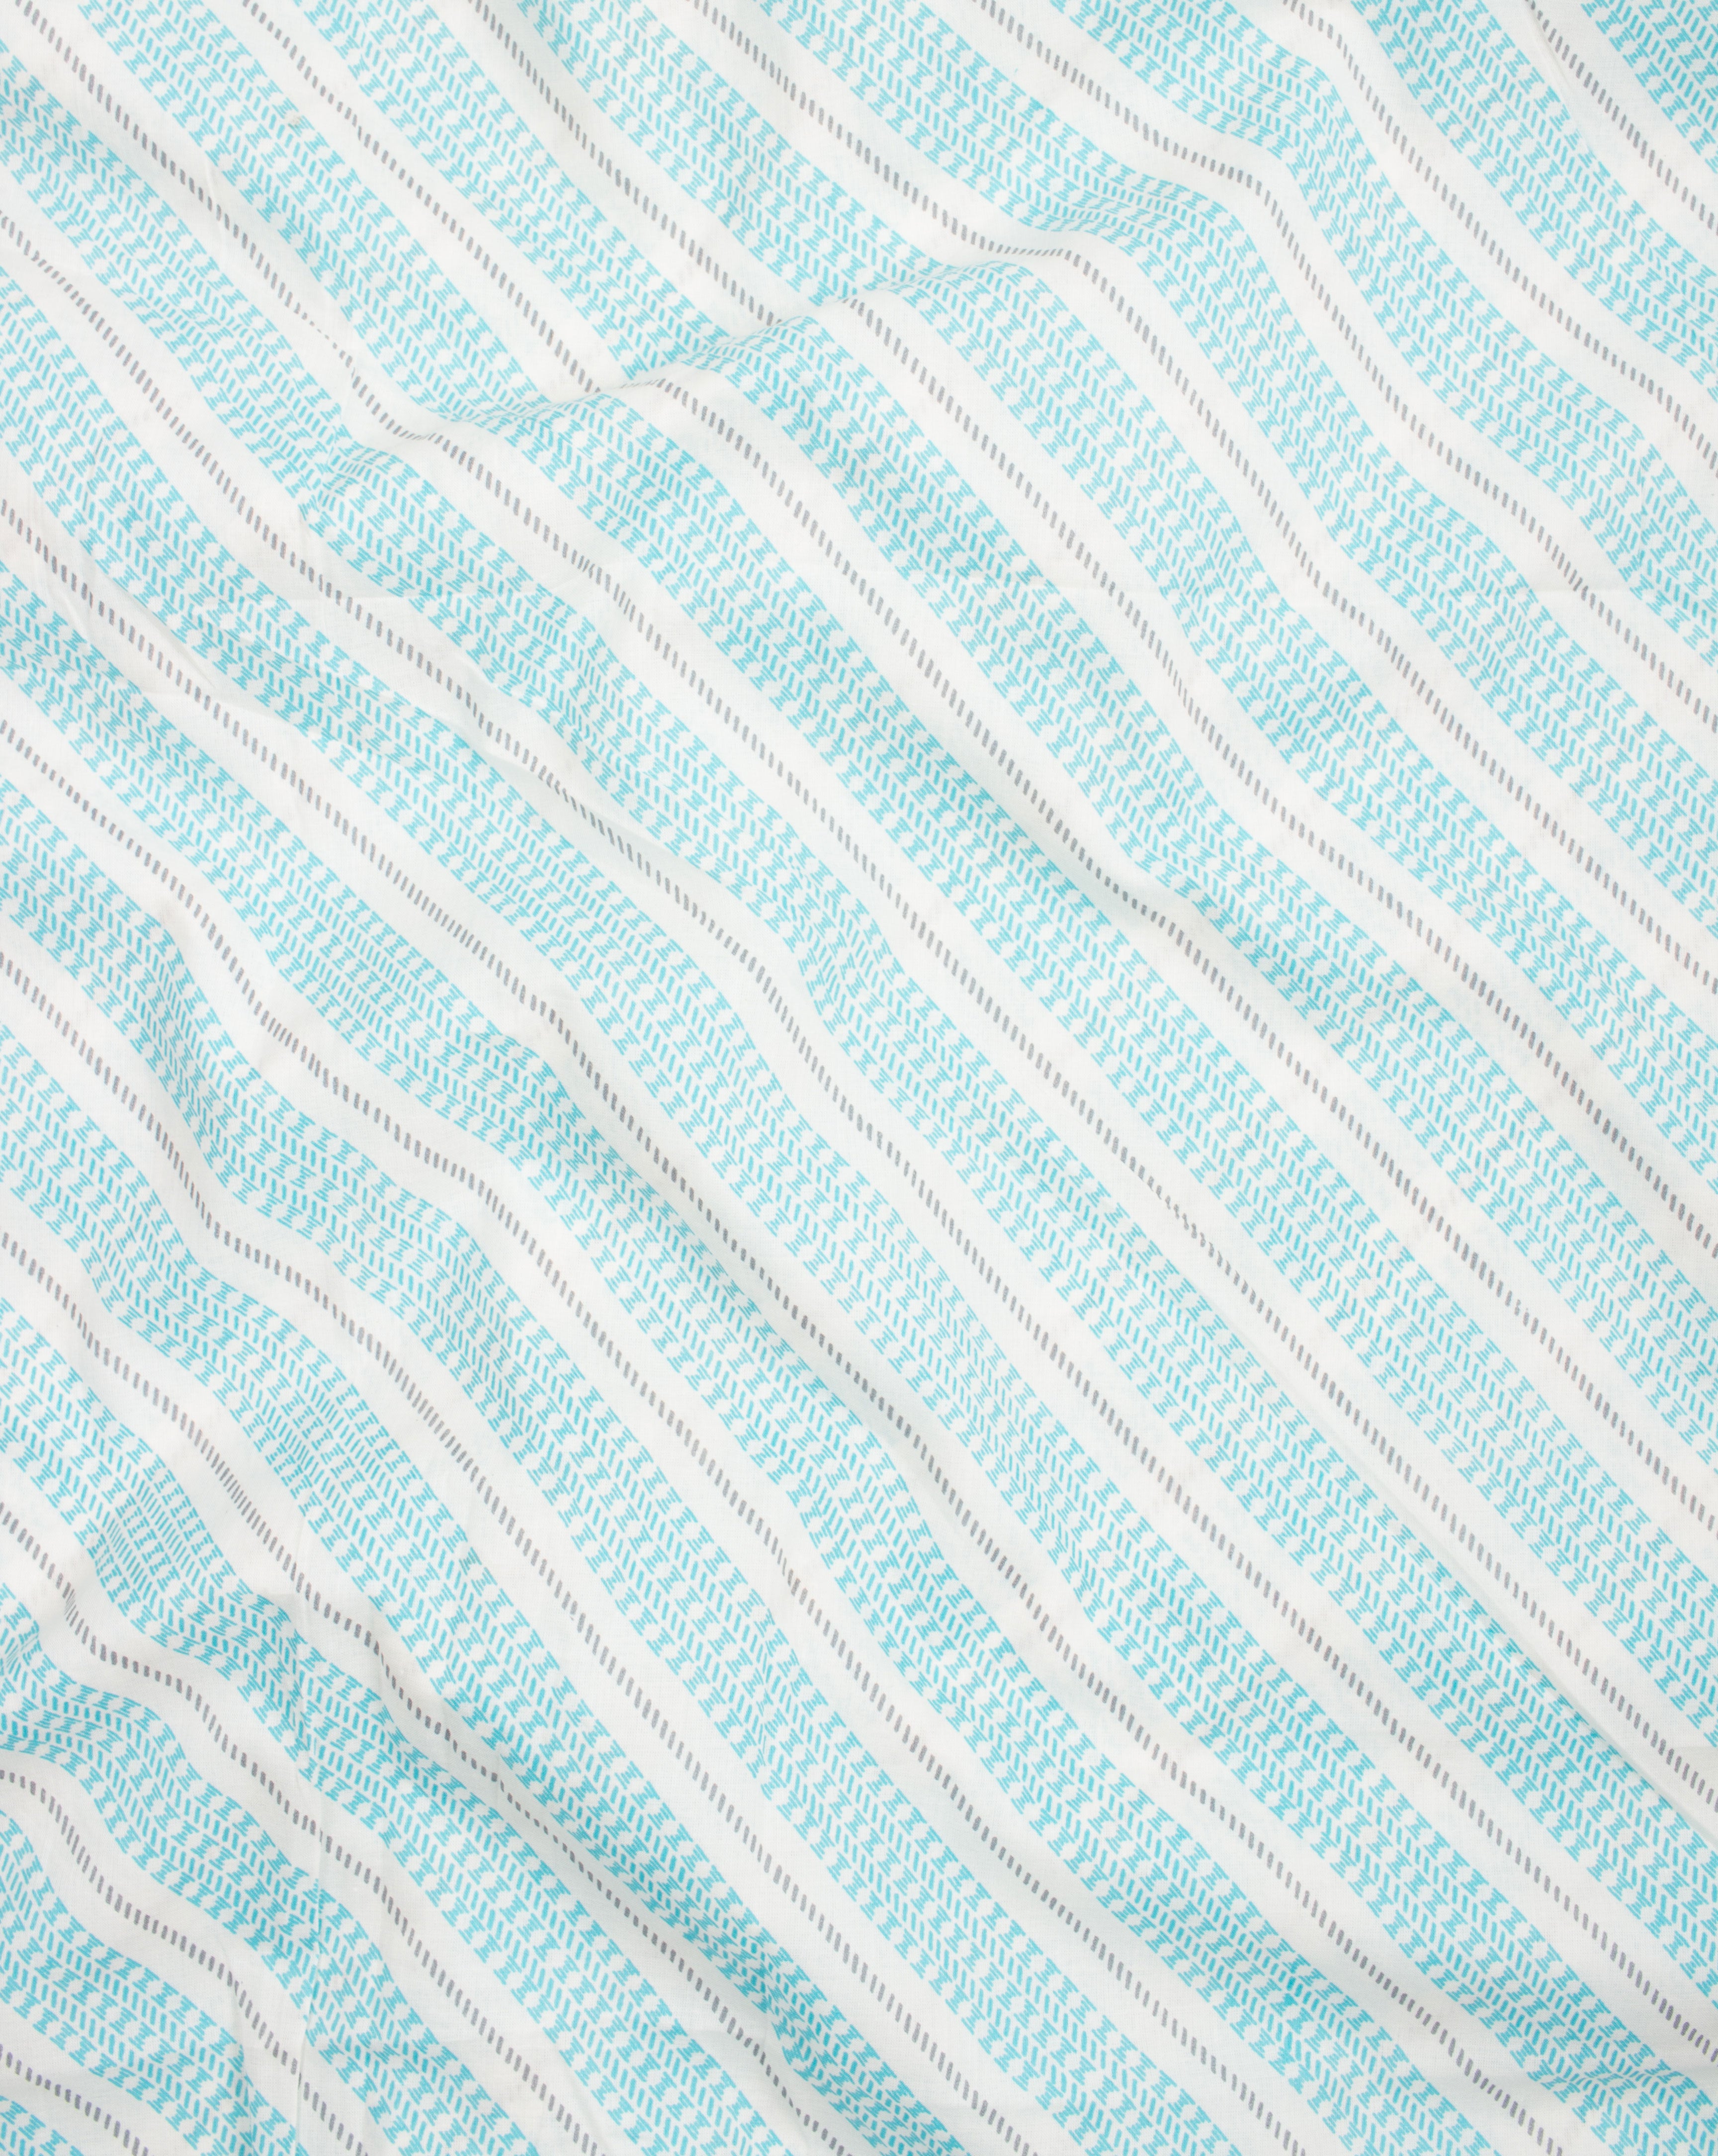 Off-White Turquoise Stripes Pattern Screen Print Cotton Fabric - Fabriclore.com